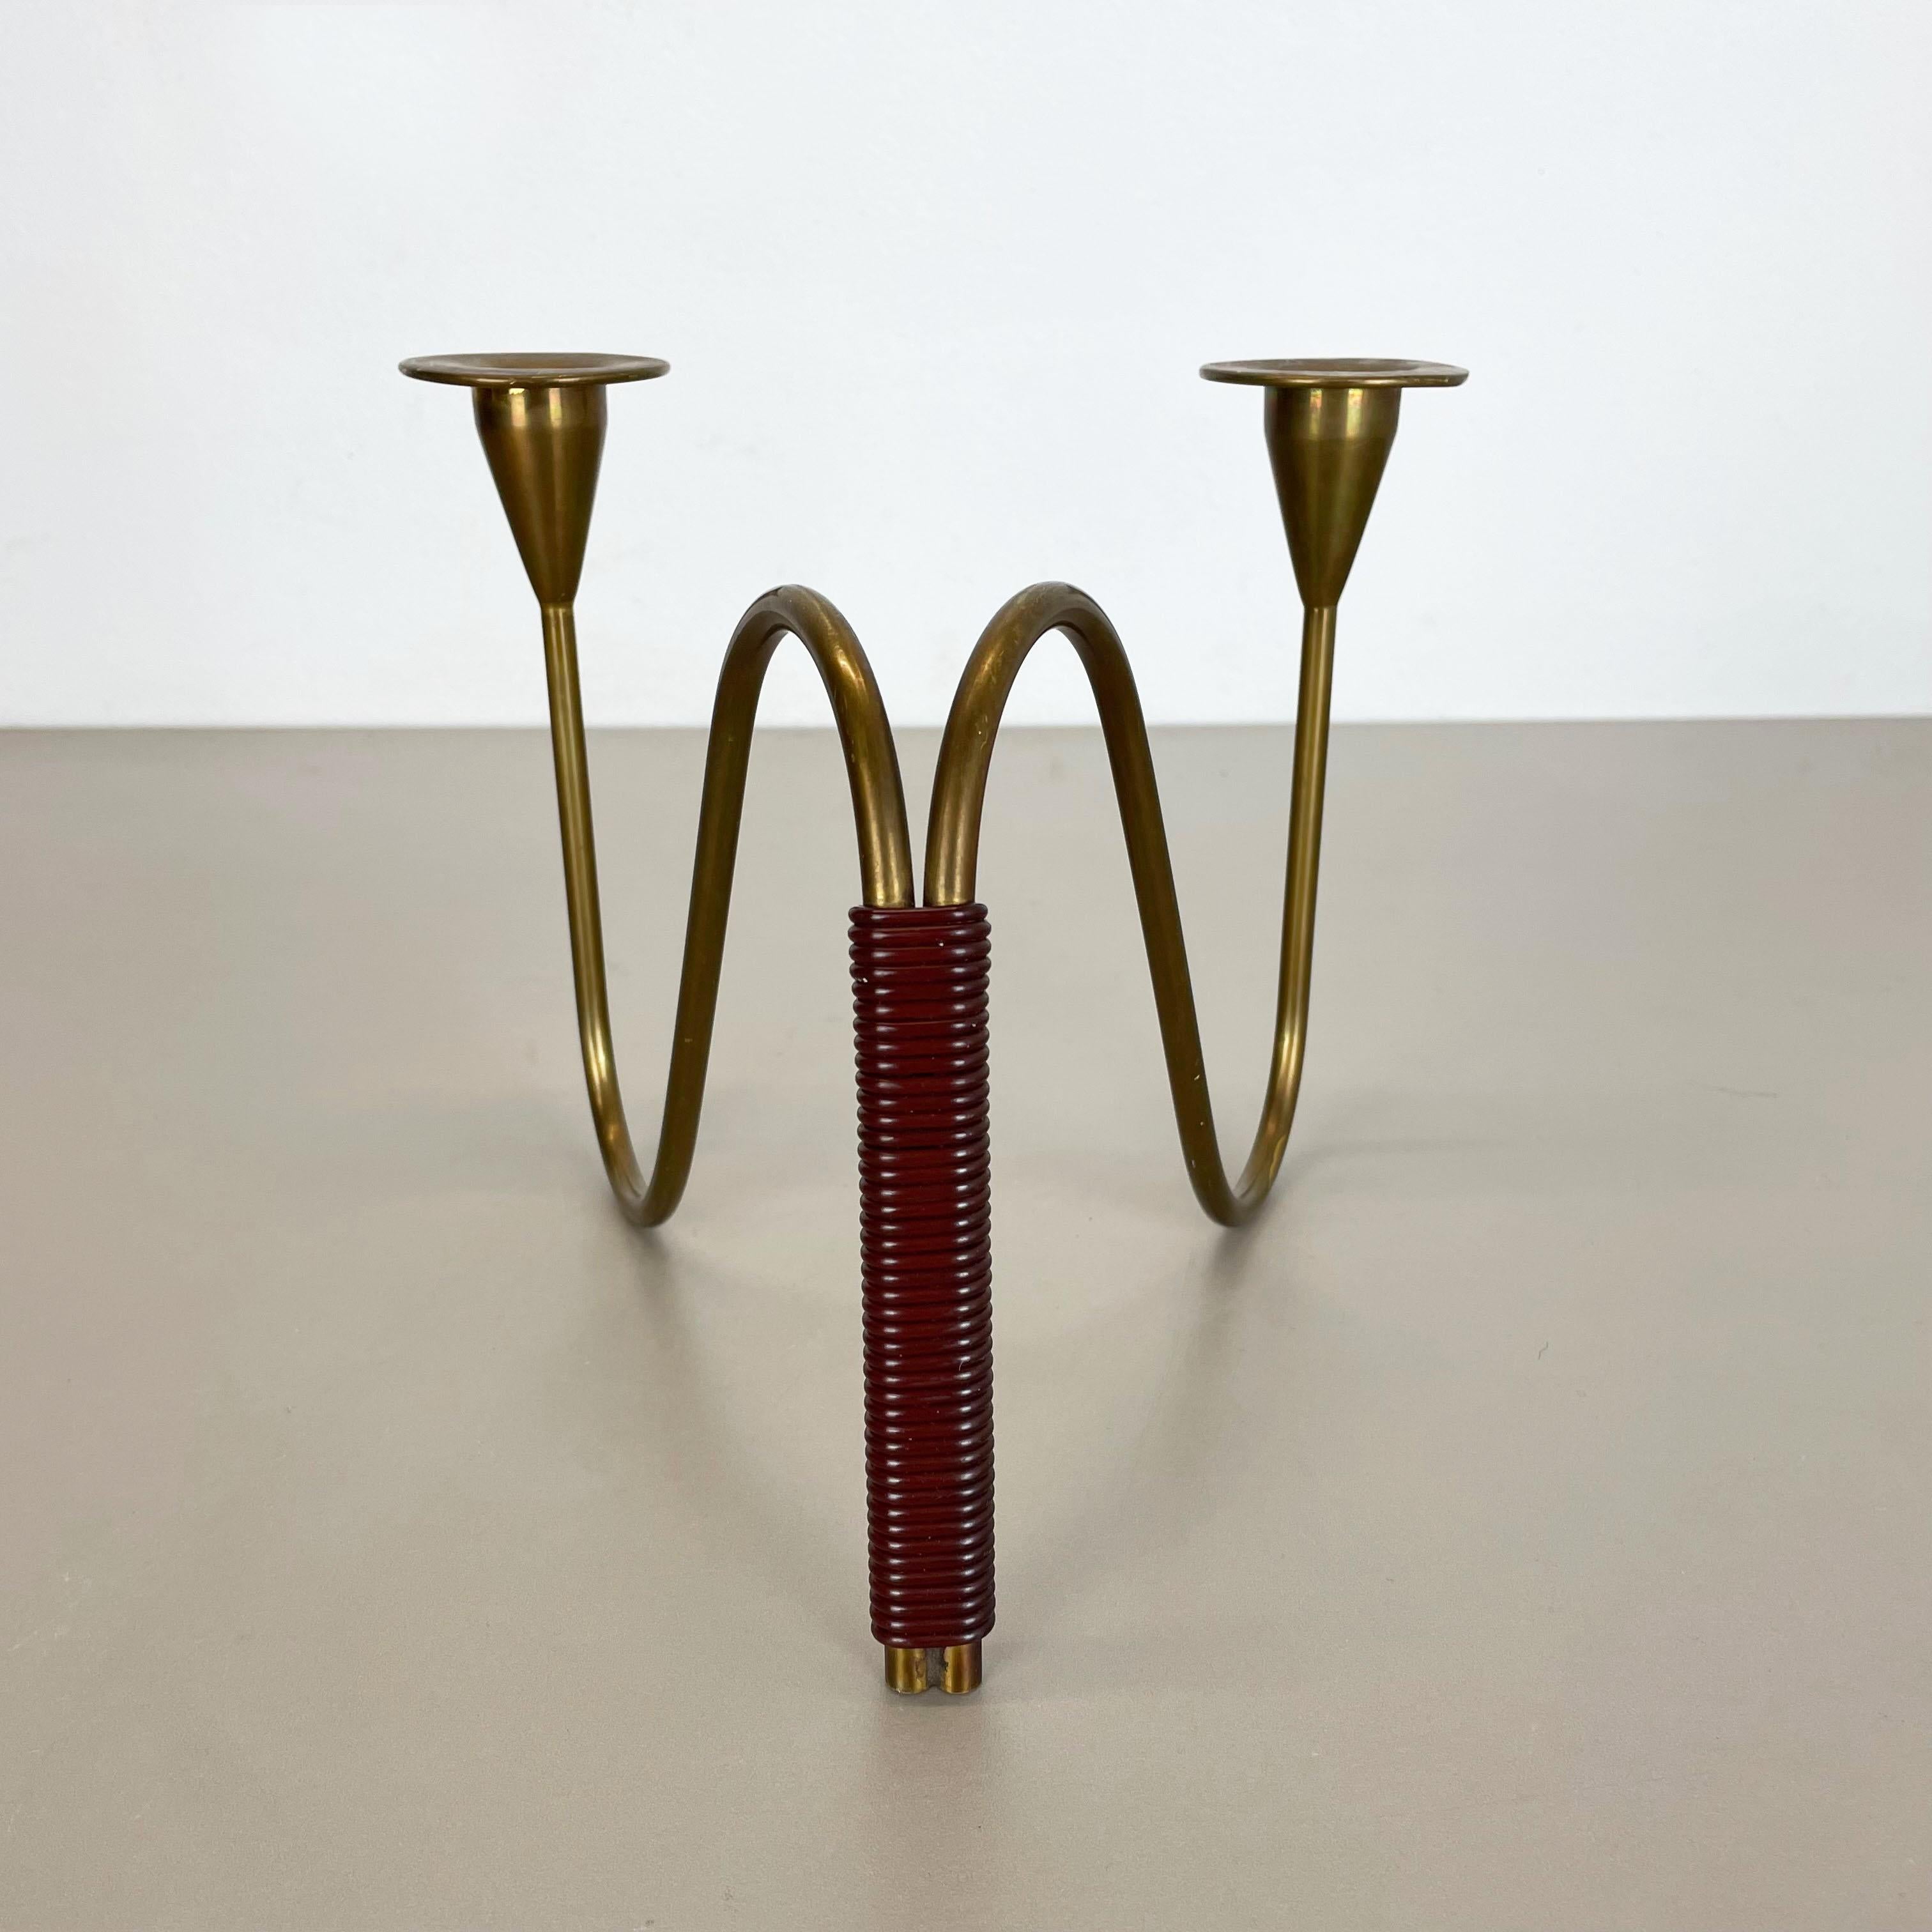 Sculptural Brass Candleholder Object by Günter Kupetz for WMF, Germany 1950s For Sale 3